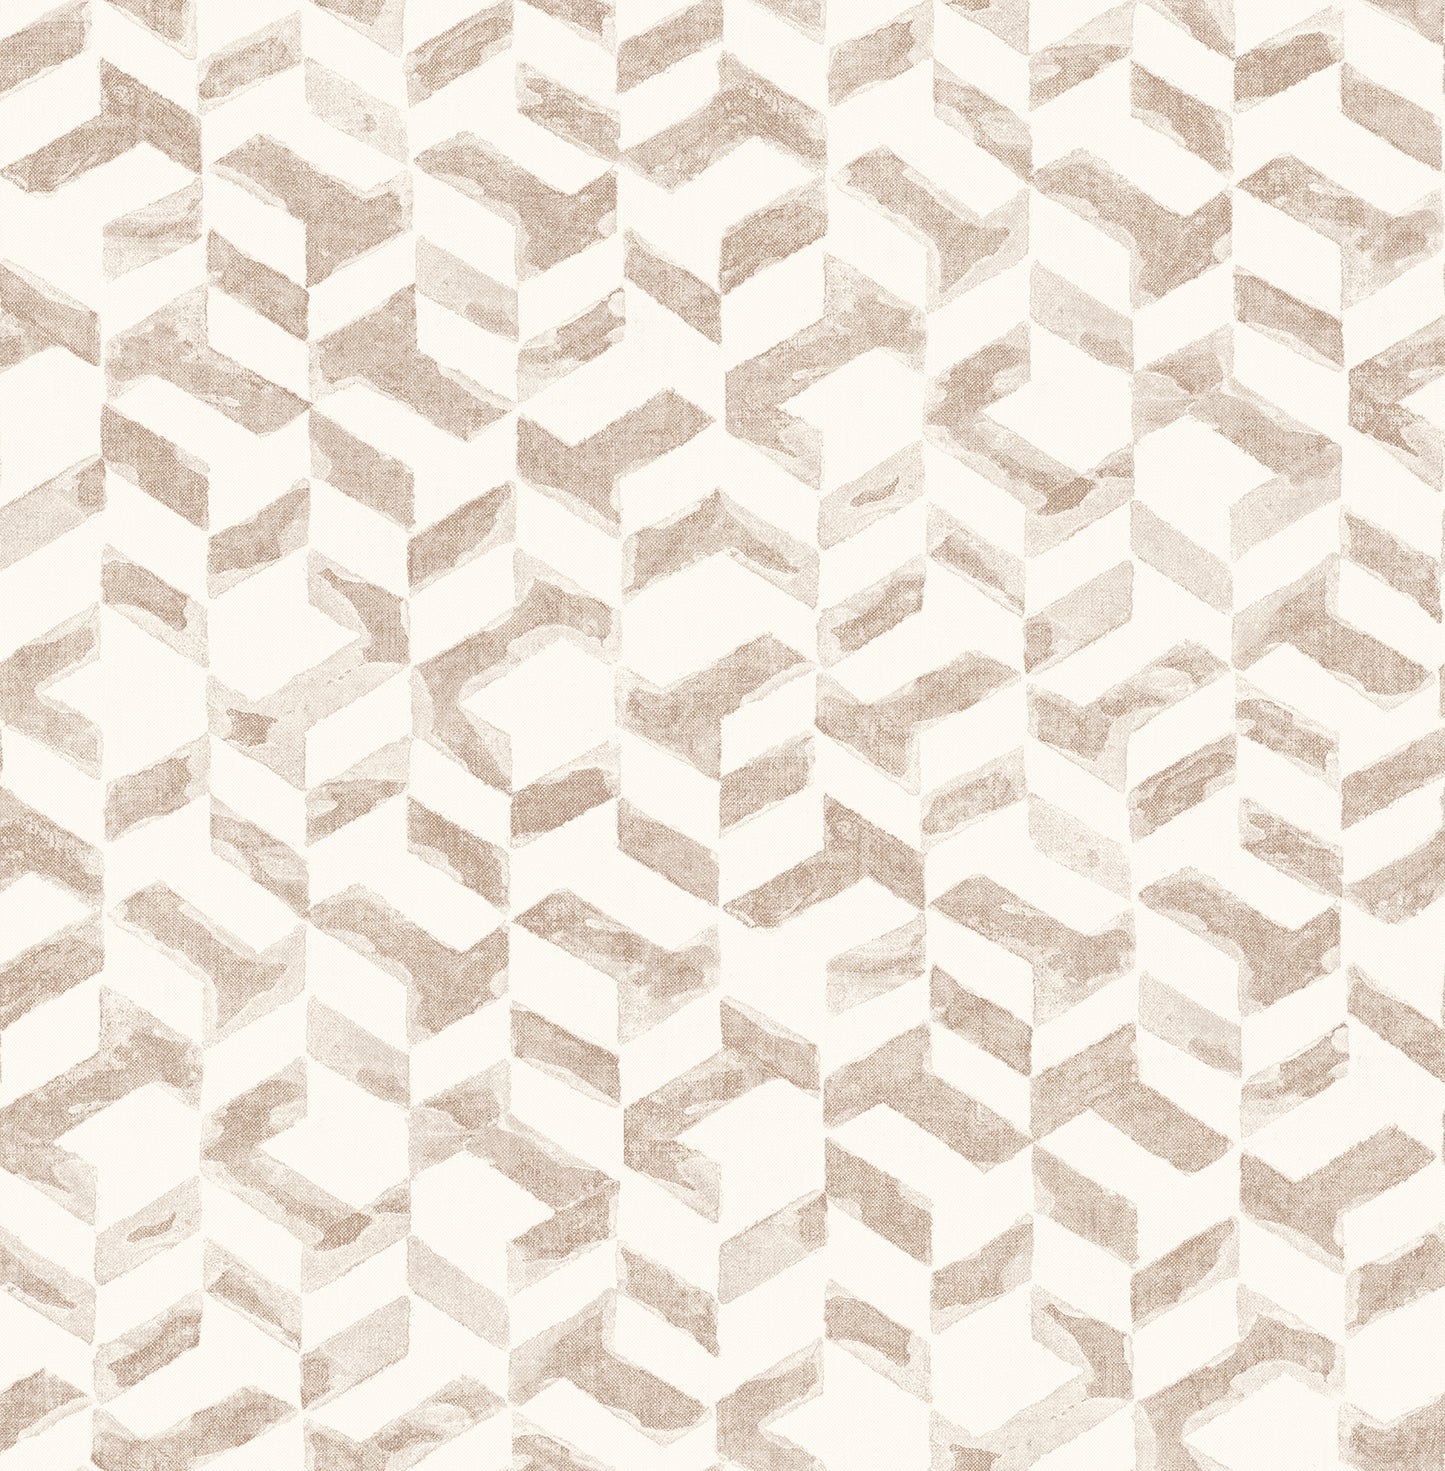 Looking for 2902-25503 Theory Instep Rose Gold Abstract Geometric A Street Prints Wallpaper